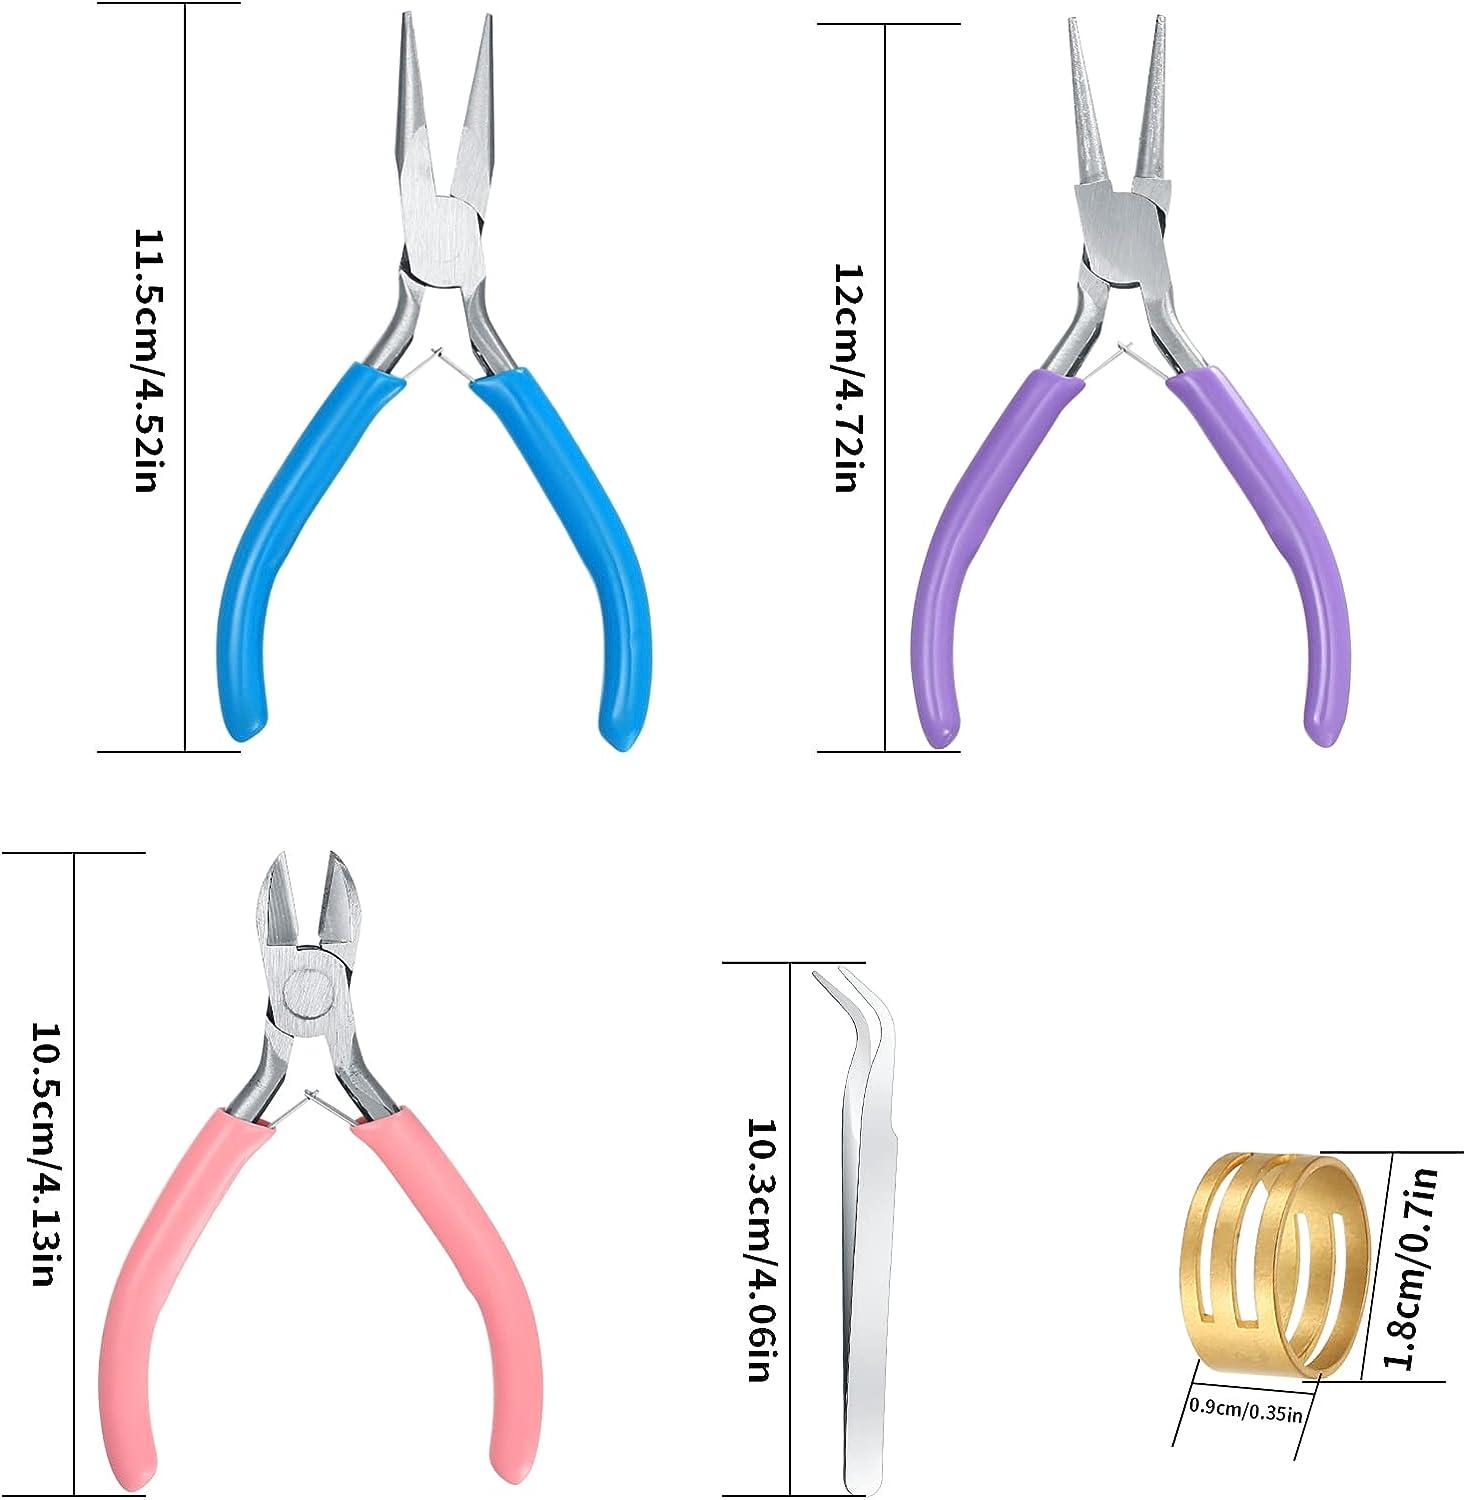 Small Pliers Jewelry Accessories Repair Making Round Nose Needle